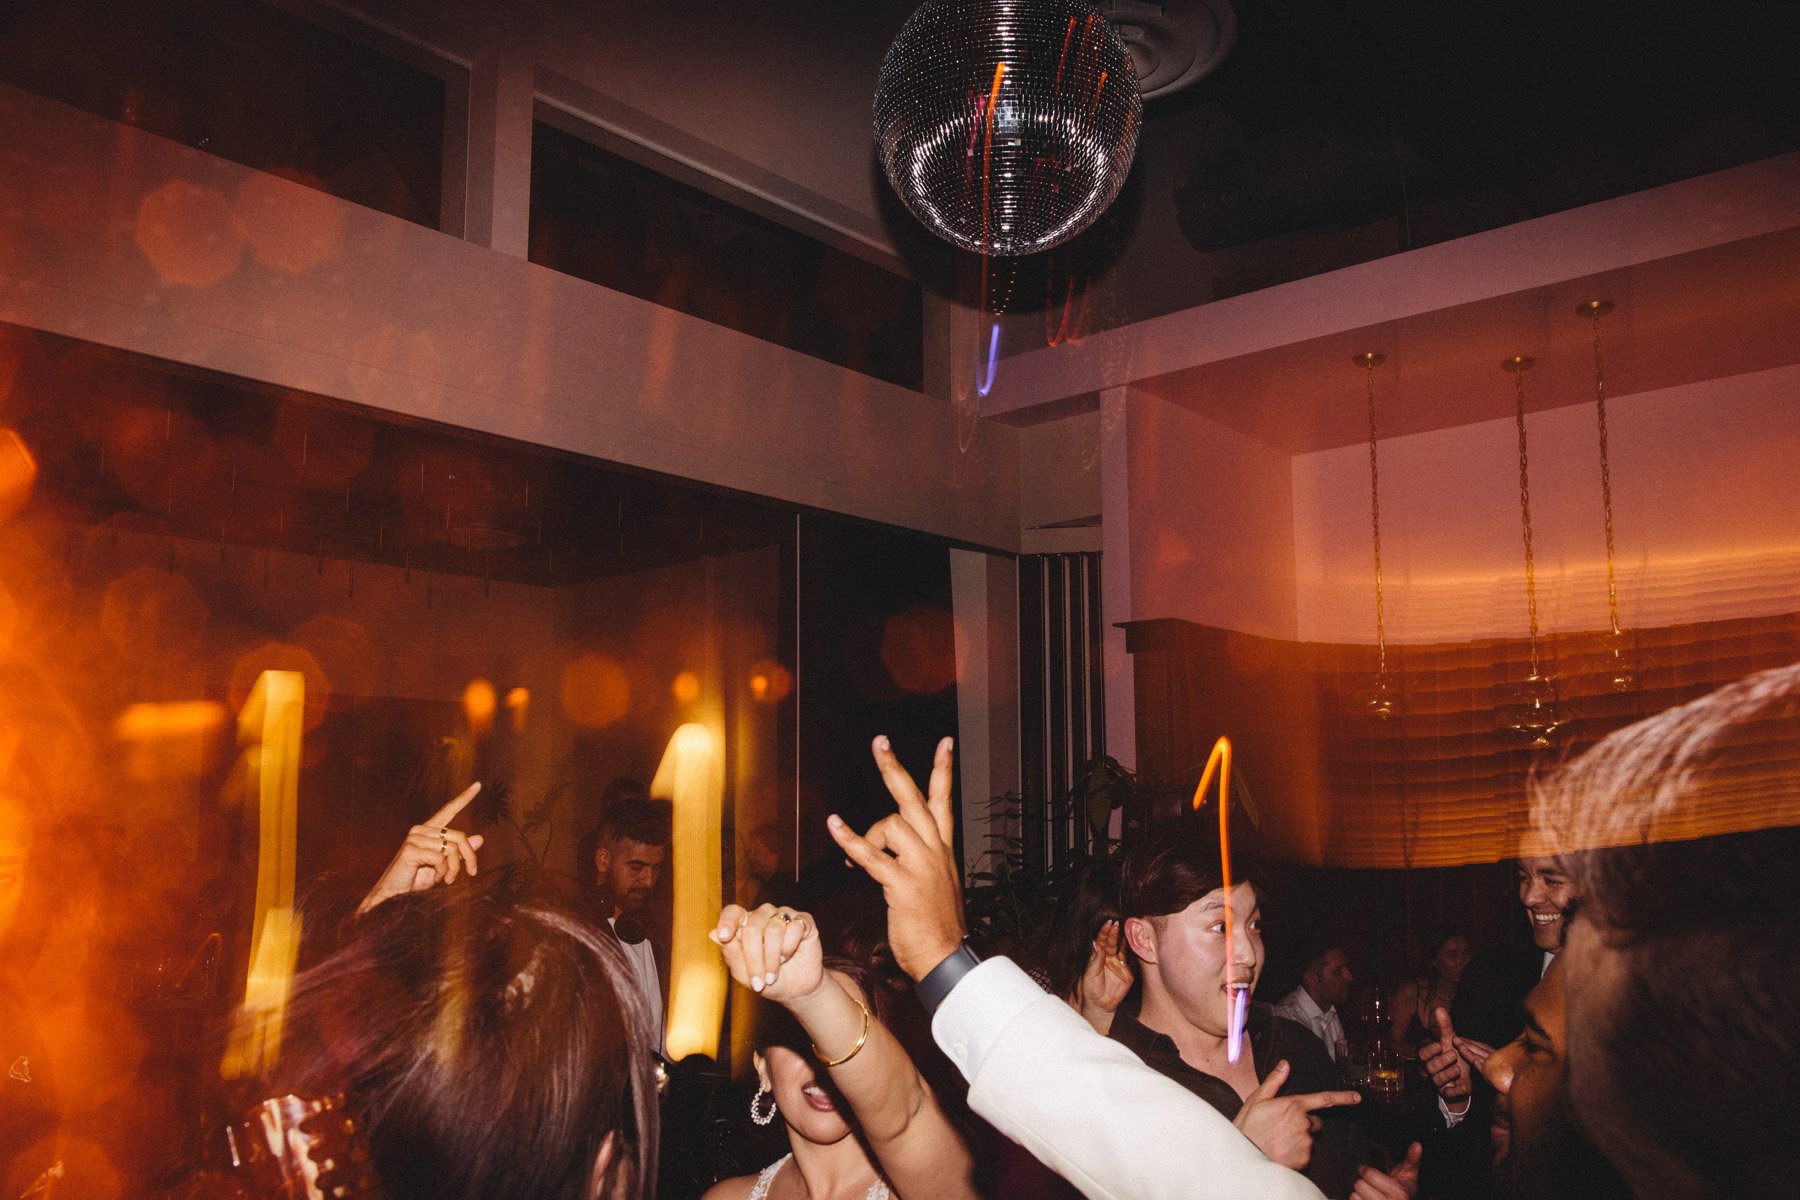 Dance party at a wedding at Moongate Lounge in San Francisco's chinatown